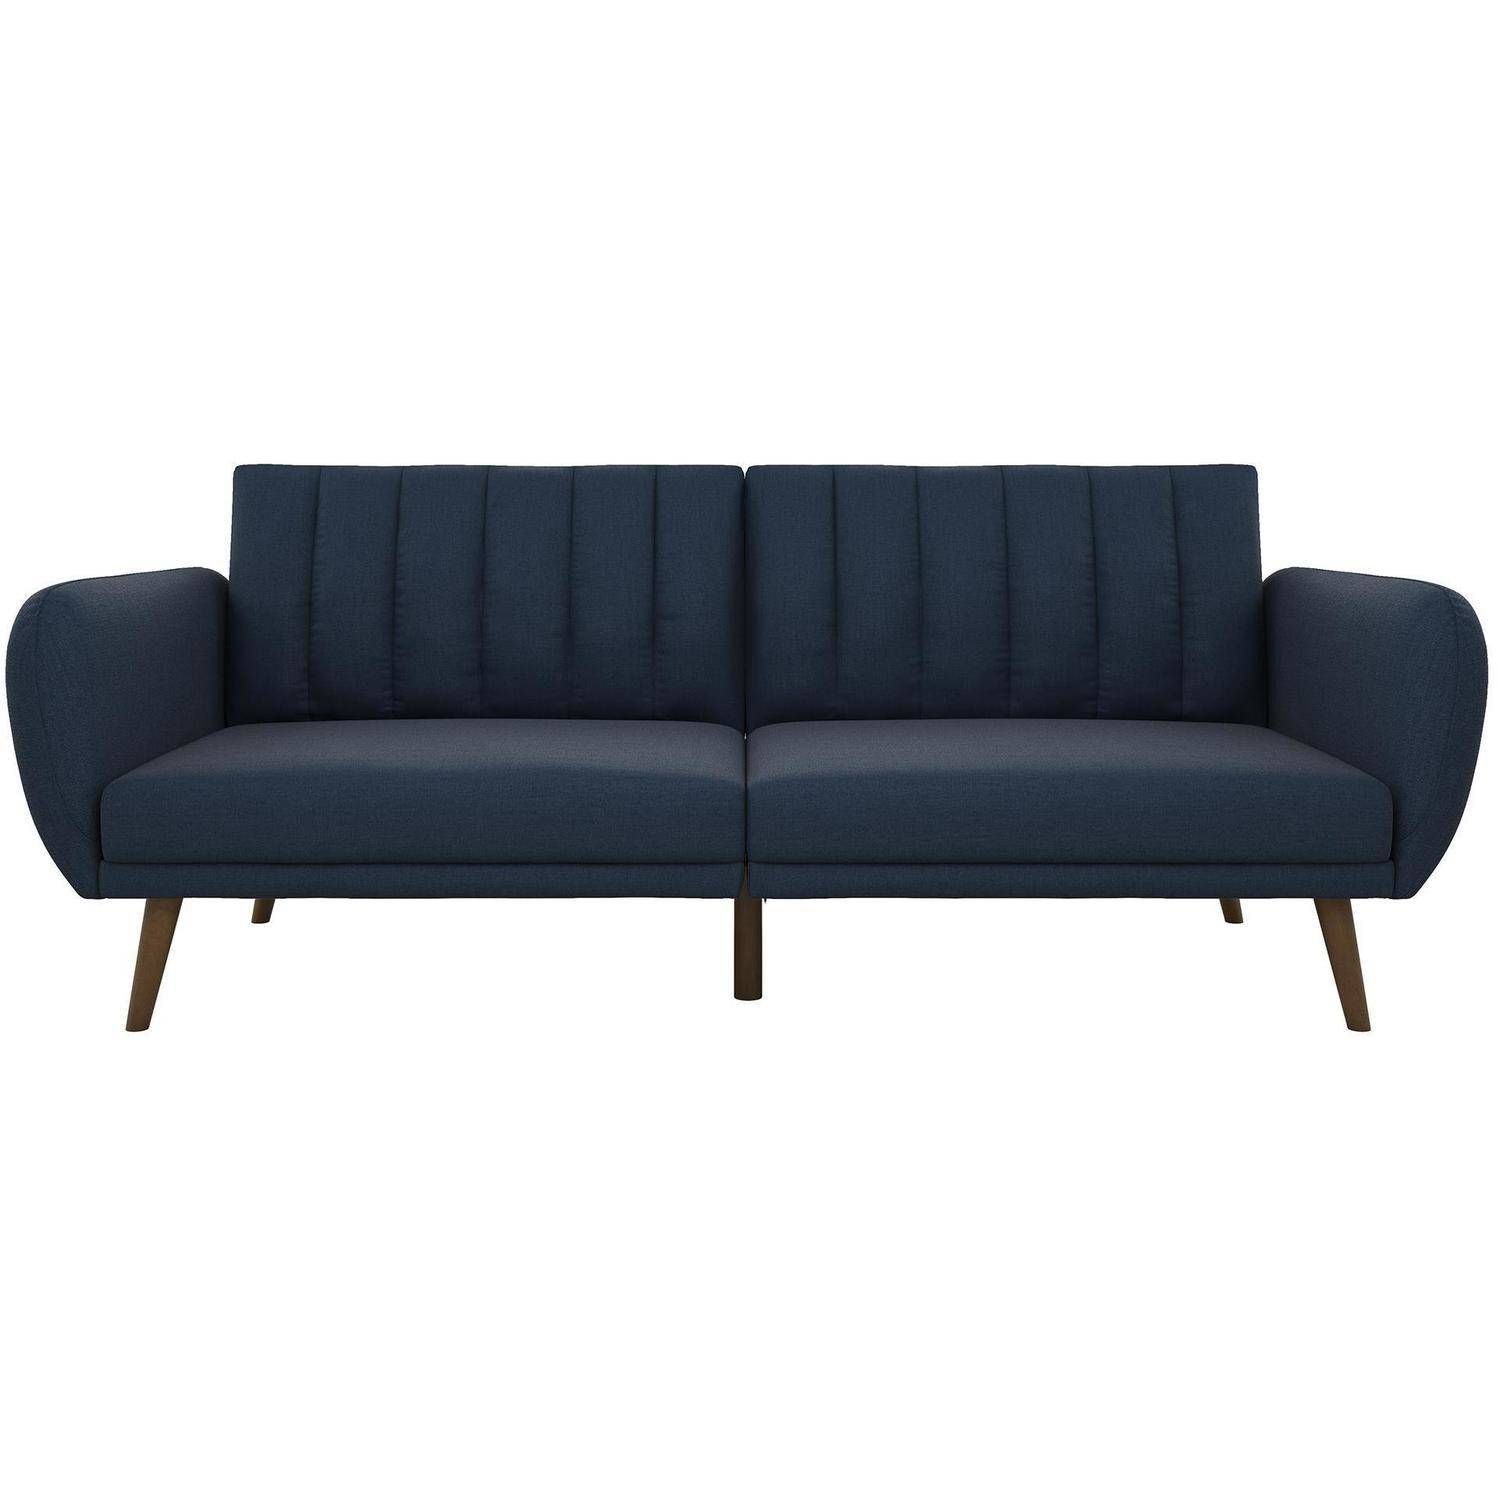 Novogratz Brittany Linen Futon Couch, Multiple Colors Intended For Brittany Sectional Futon Sofas (View 5 of 15)